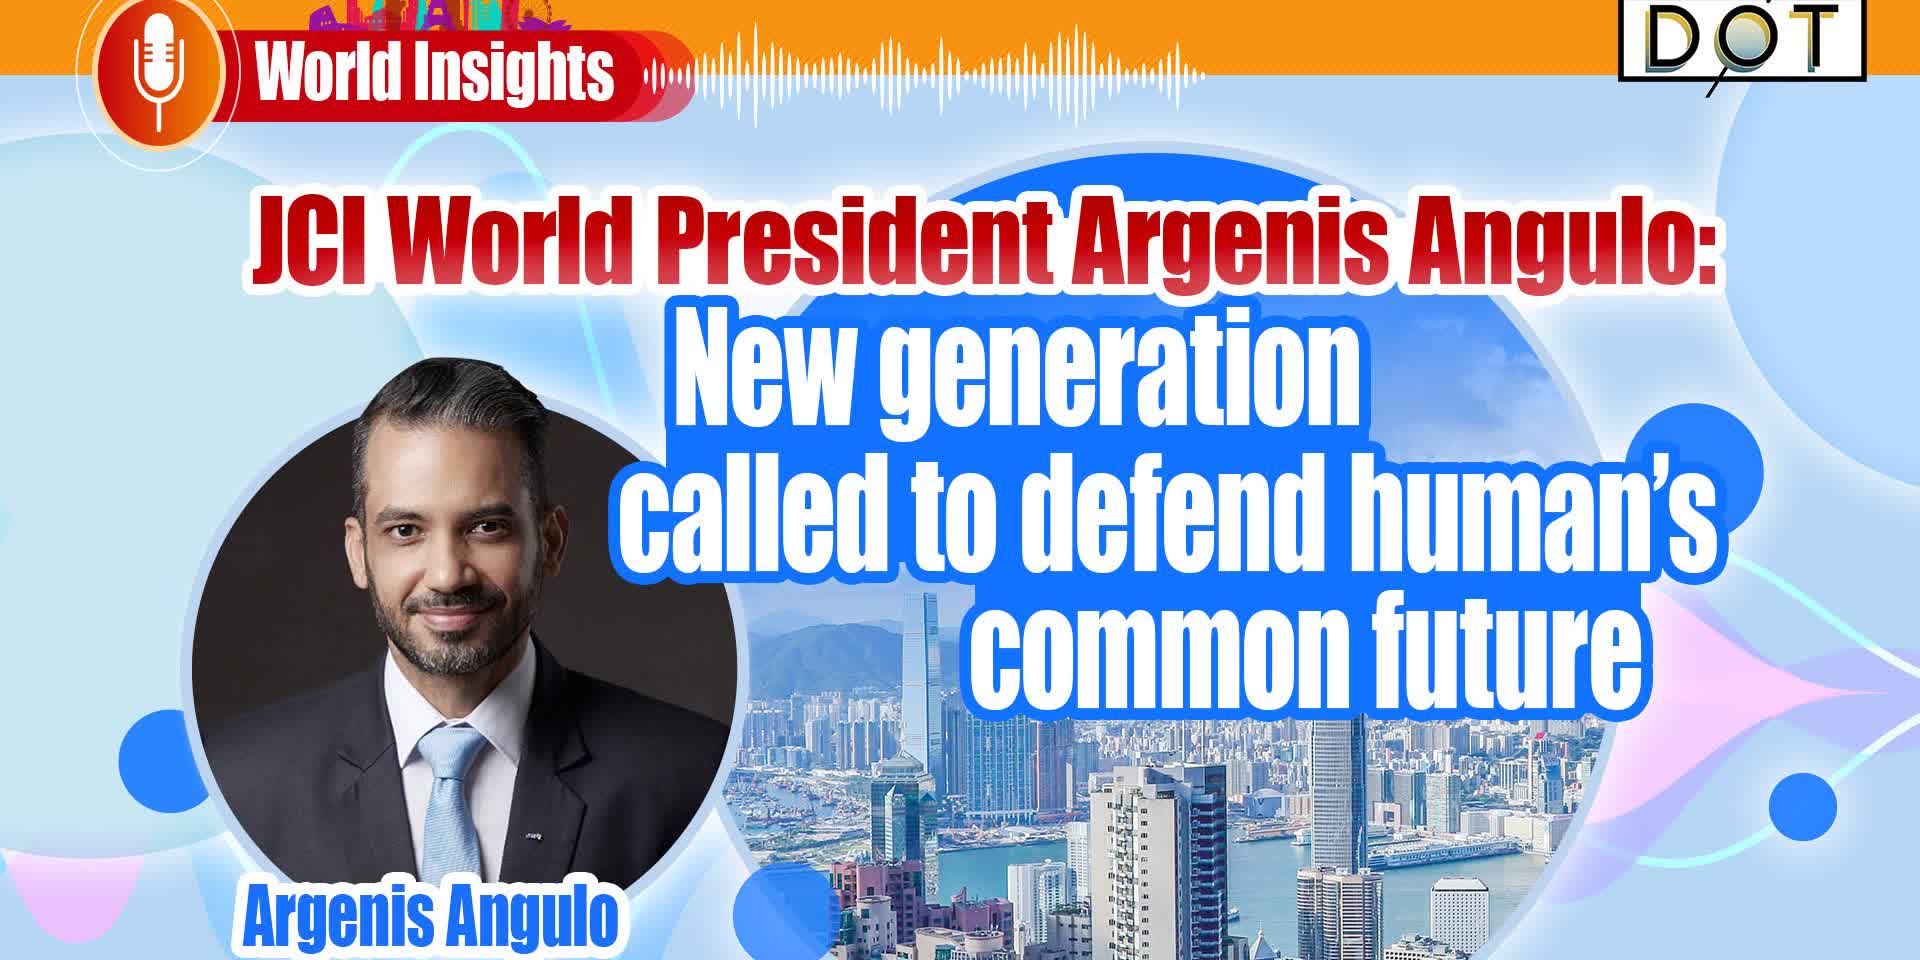 World Insights | JCI World President Argenis Angulo: New generation called to defend human’s common future